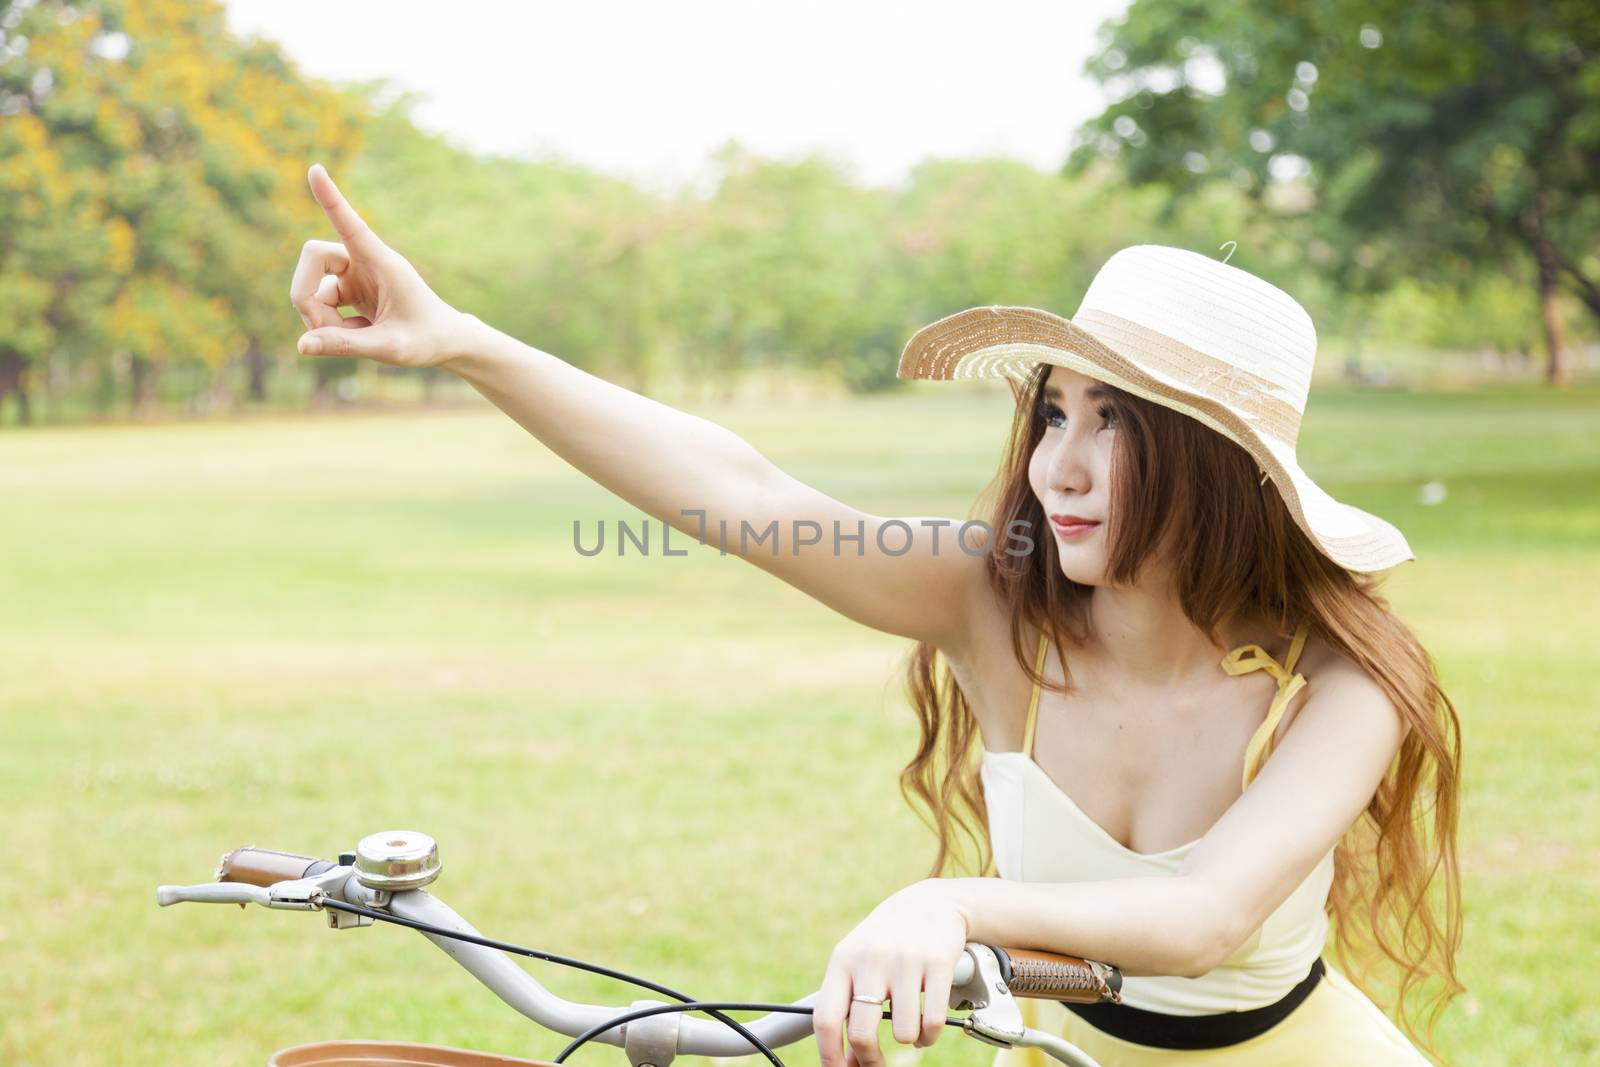 Woman sitting on the bike and pointing forward. In the lawn of the park.